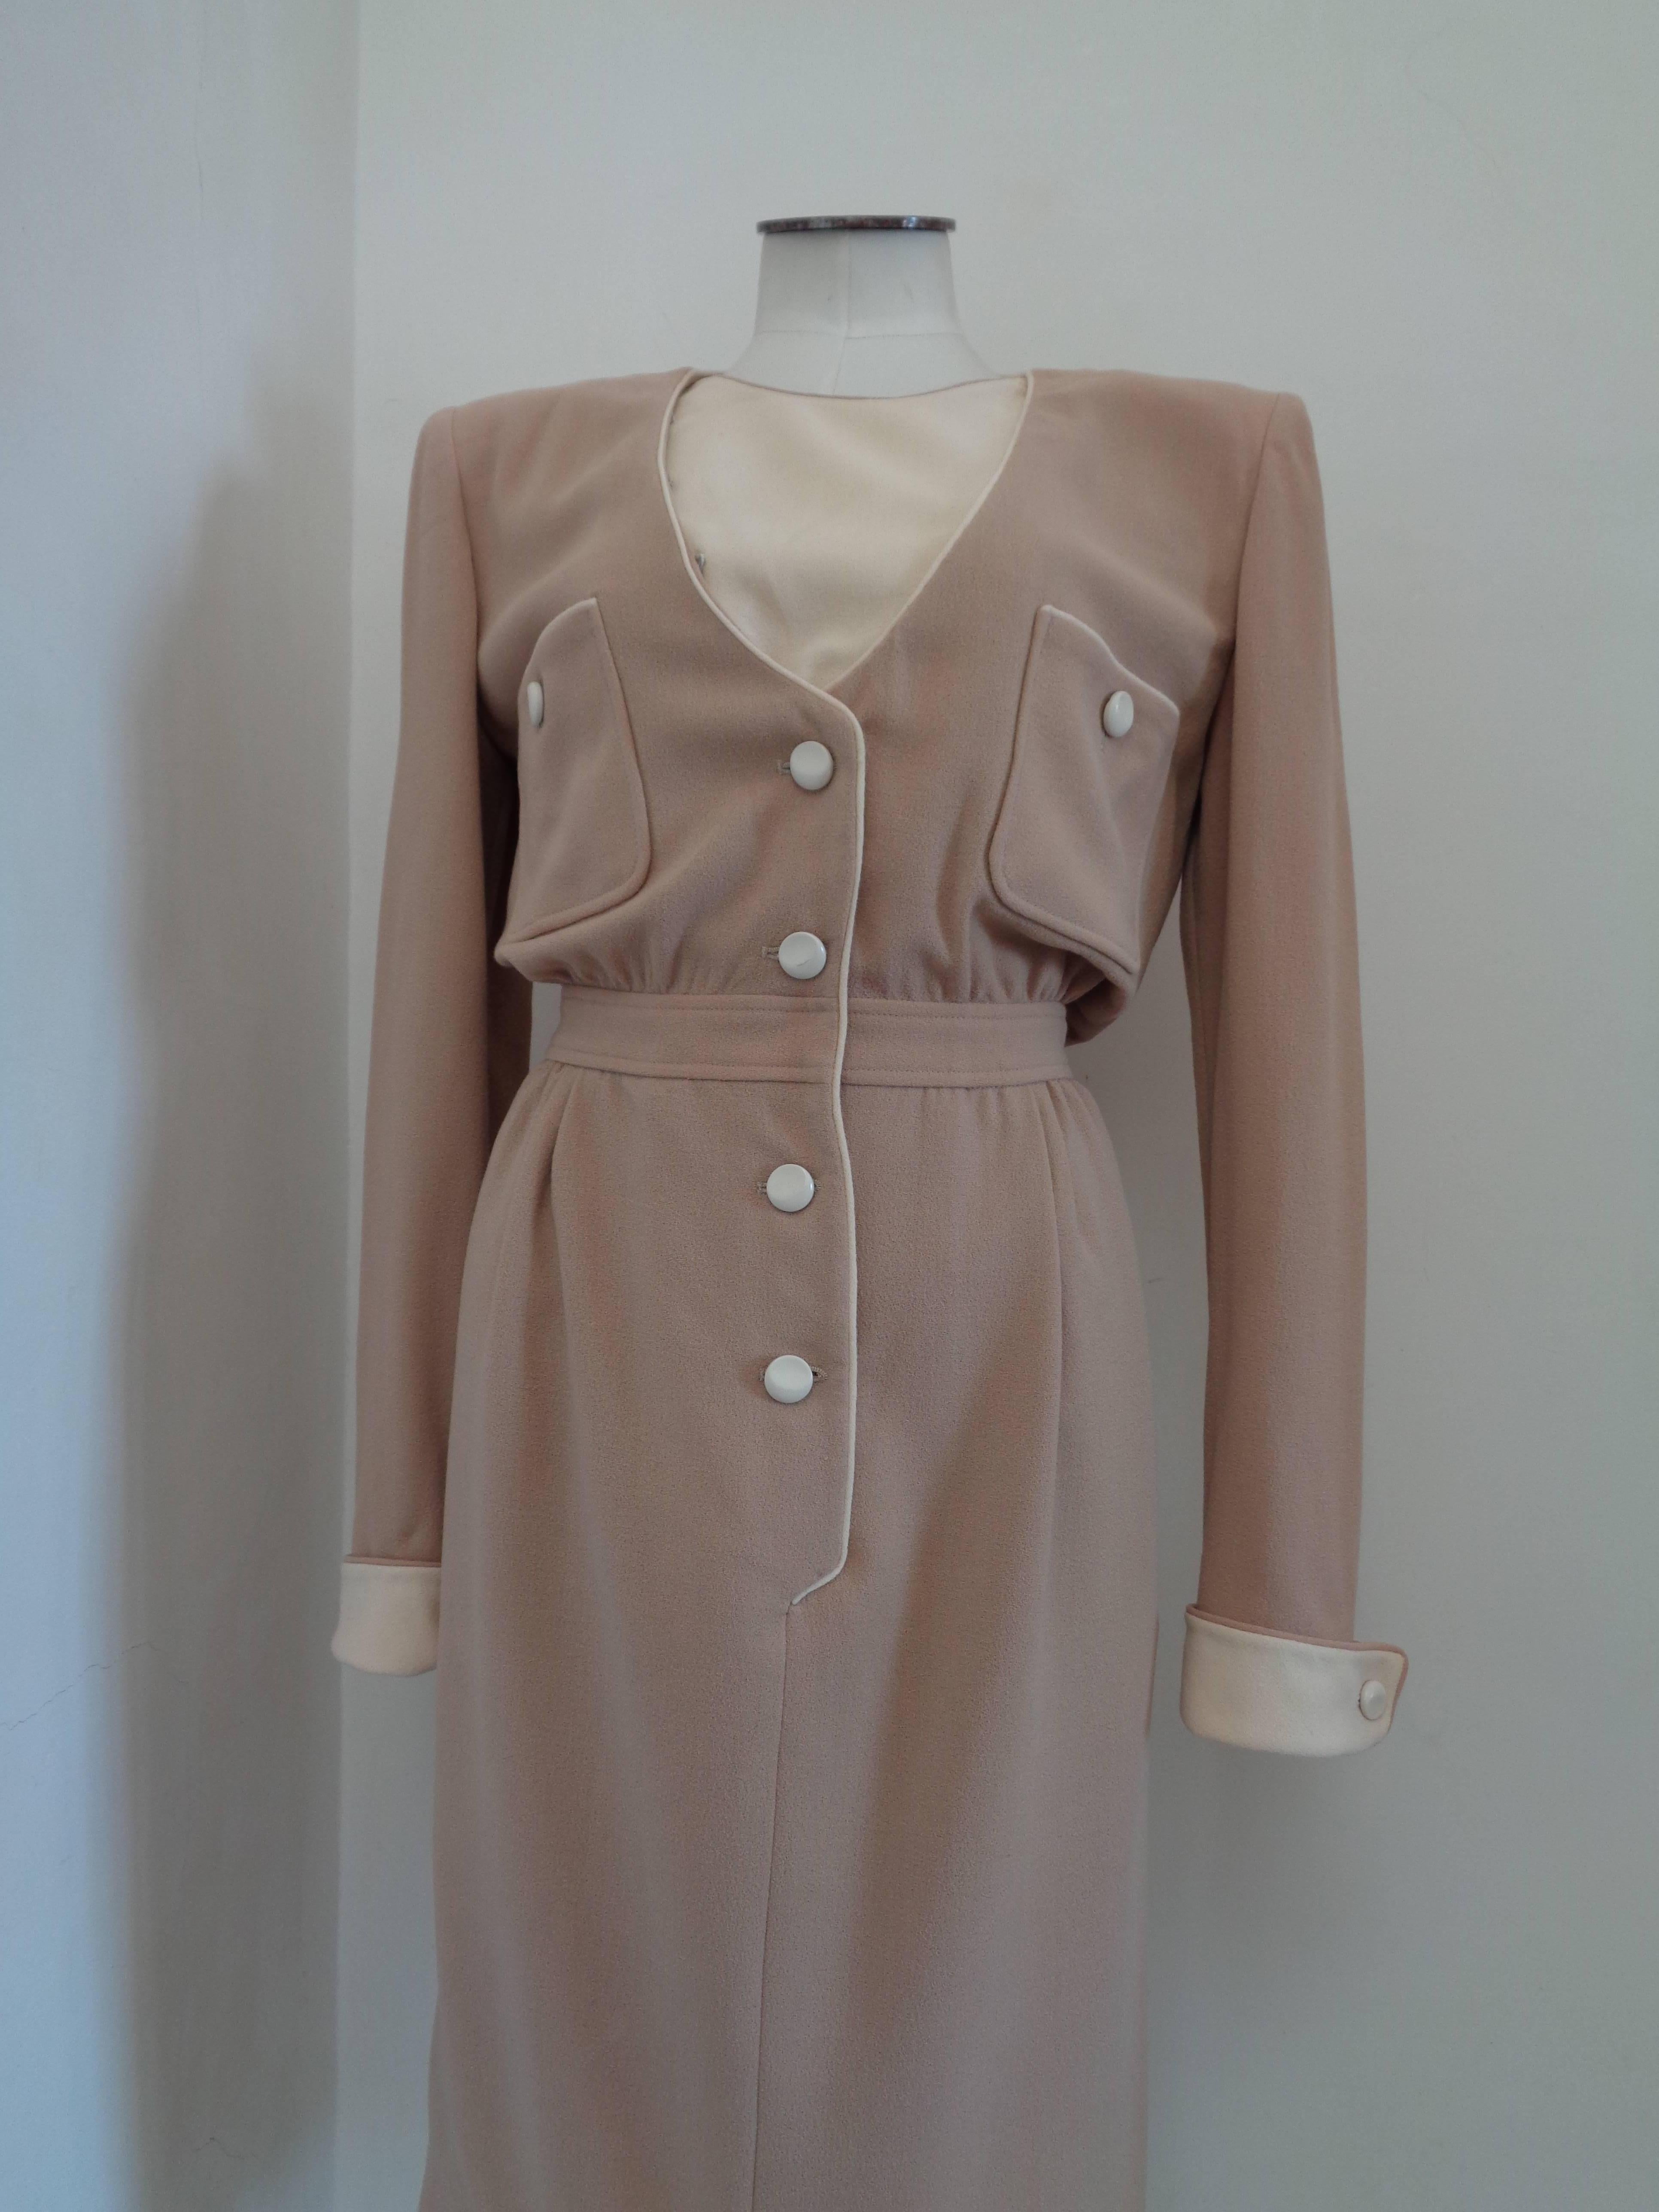 1976 Valentino Beije Cream Dress

Totally made in italy in size US 10